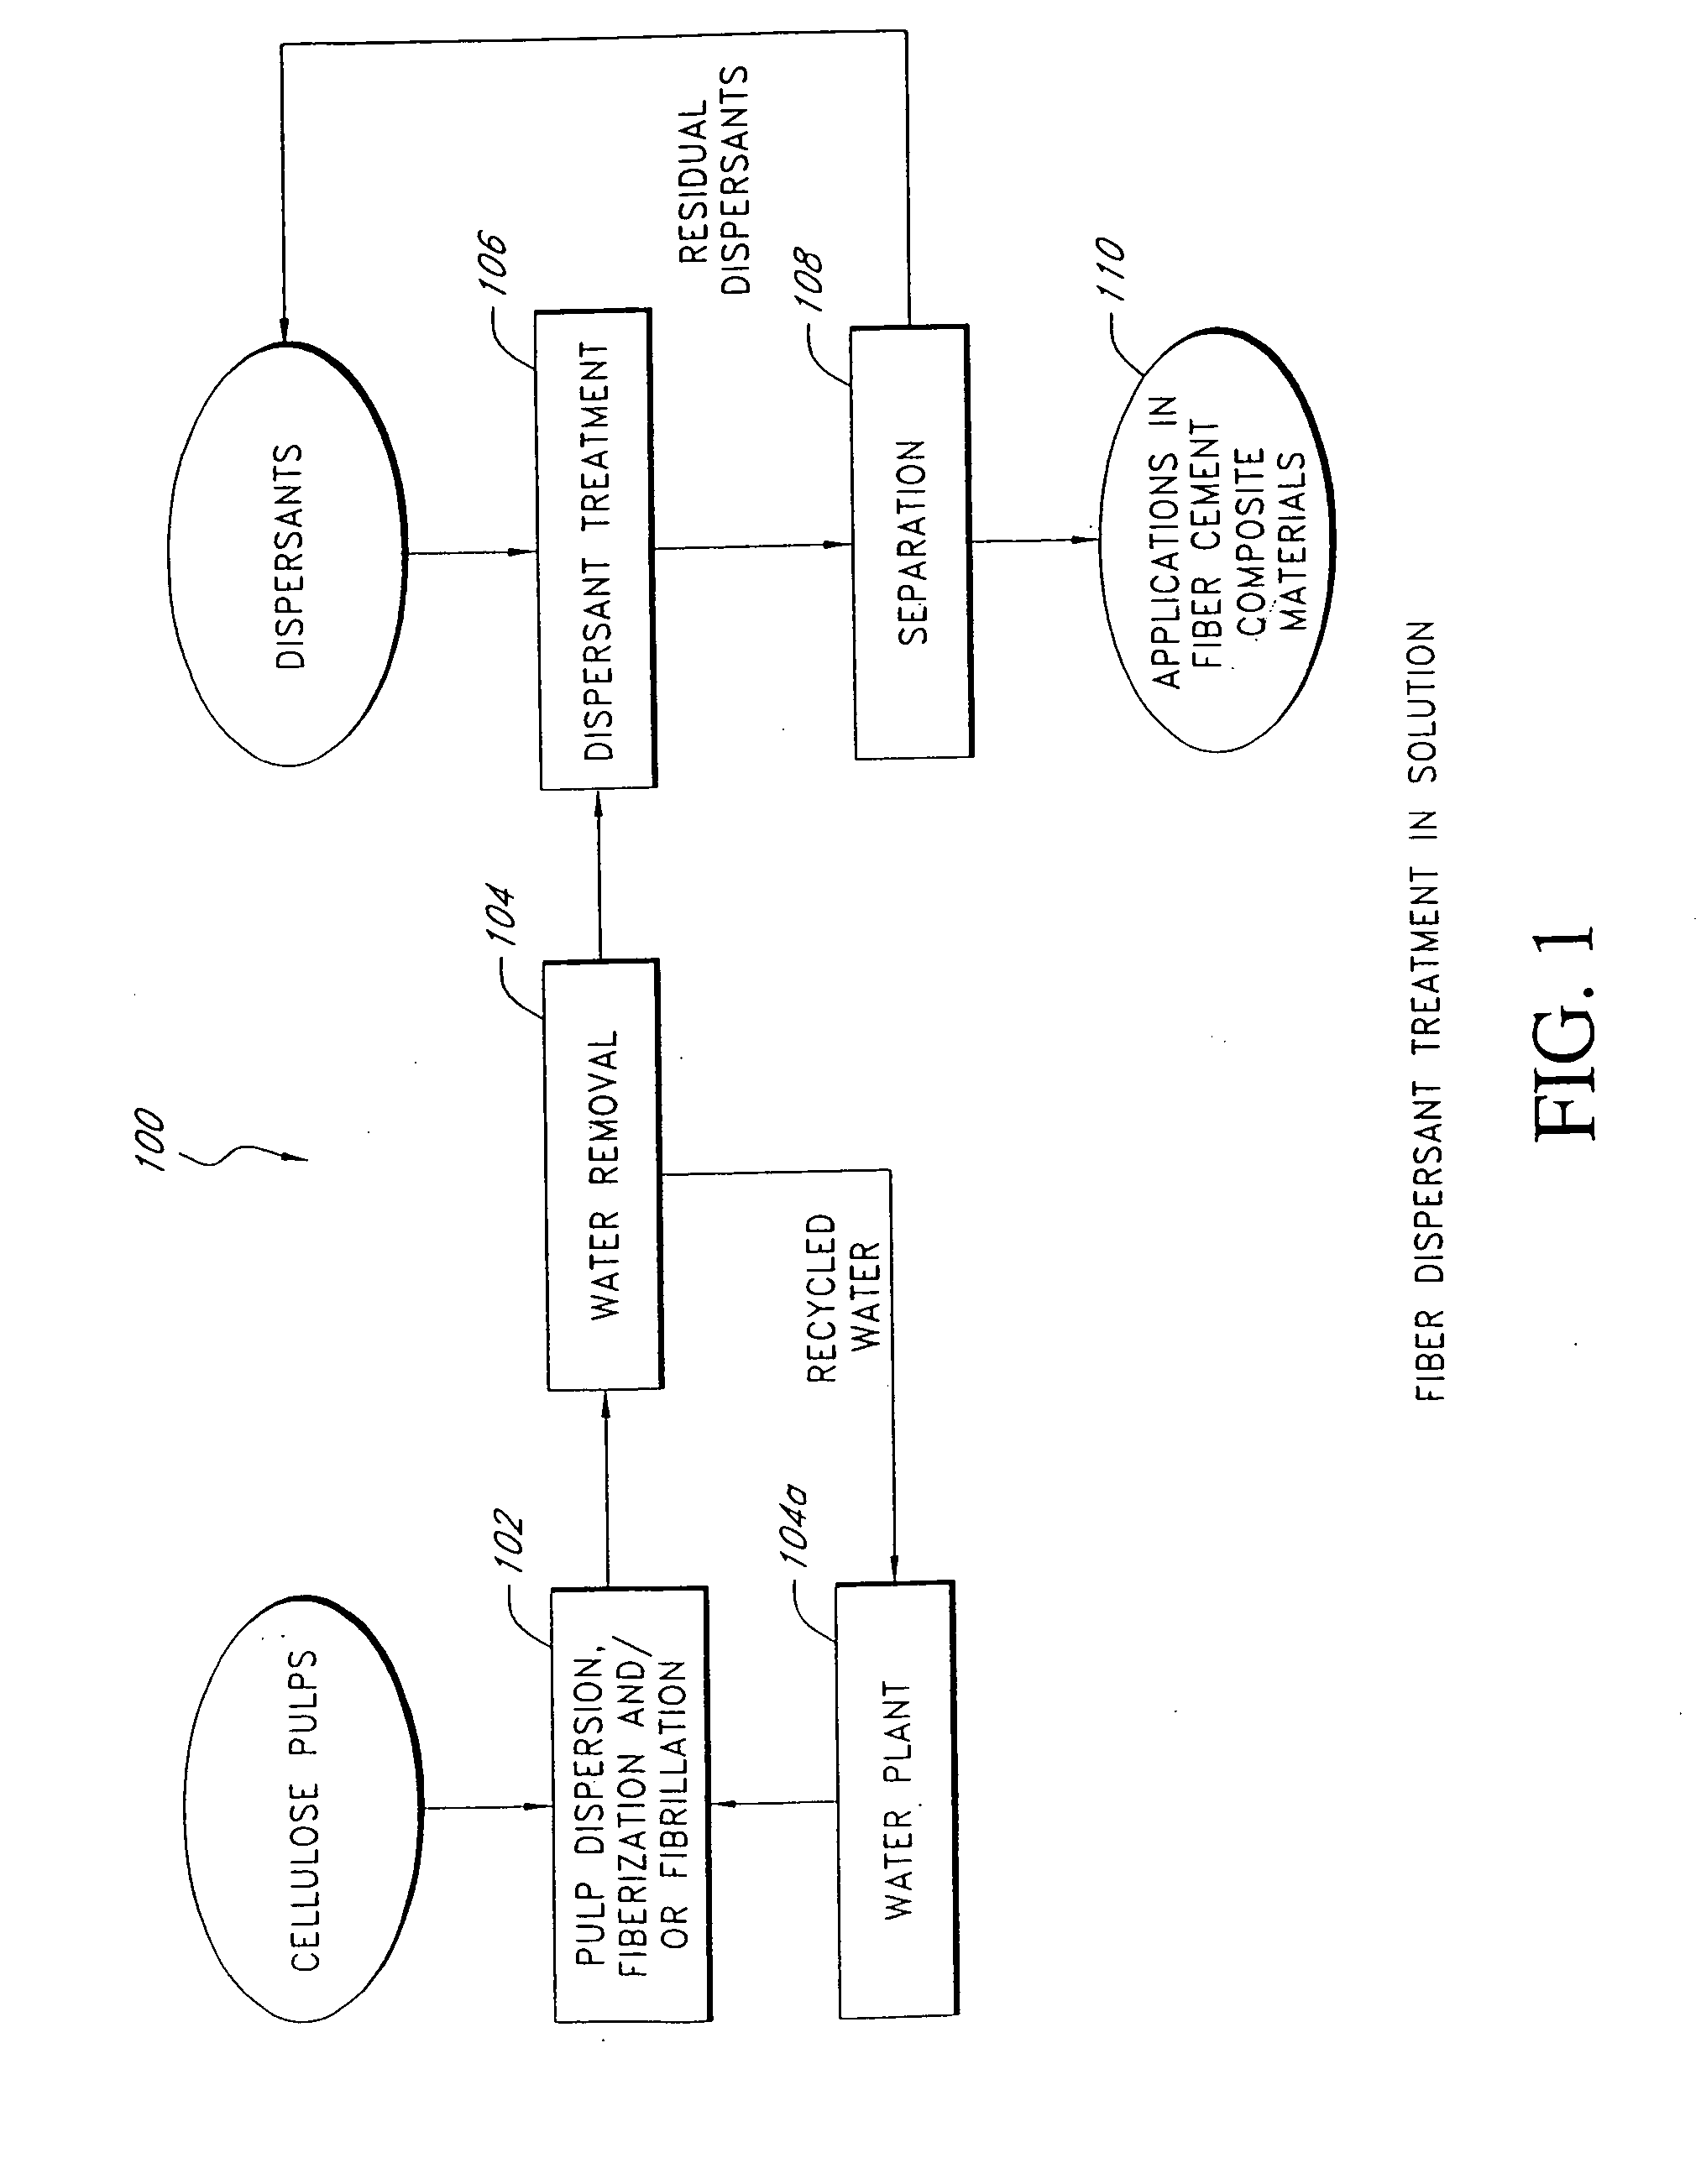 Fiber reinforced cement composite materials using chemically treated fibers with improved dispersibility